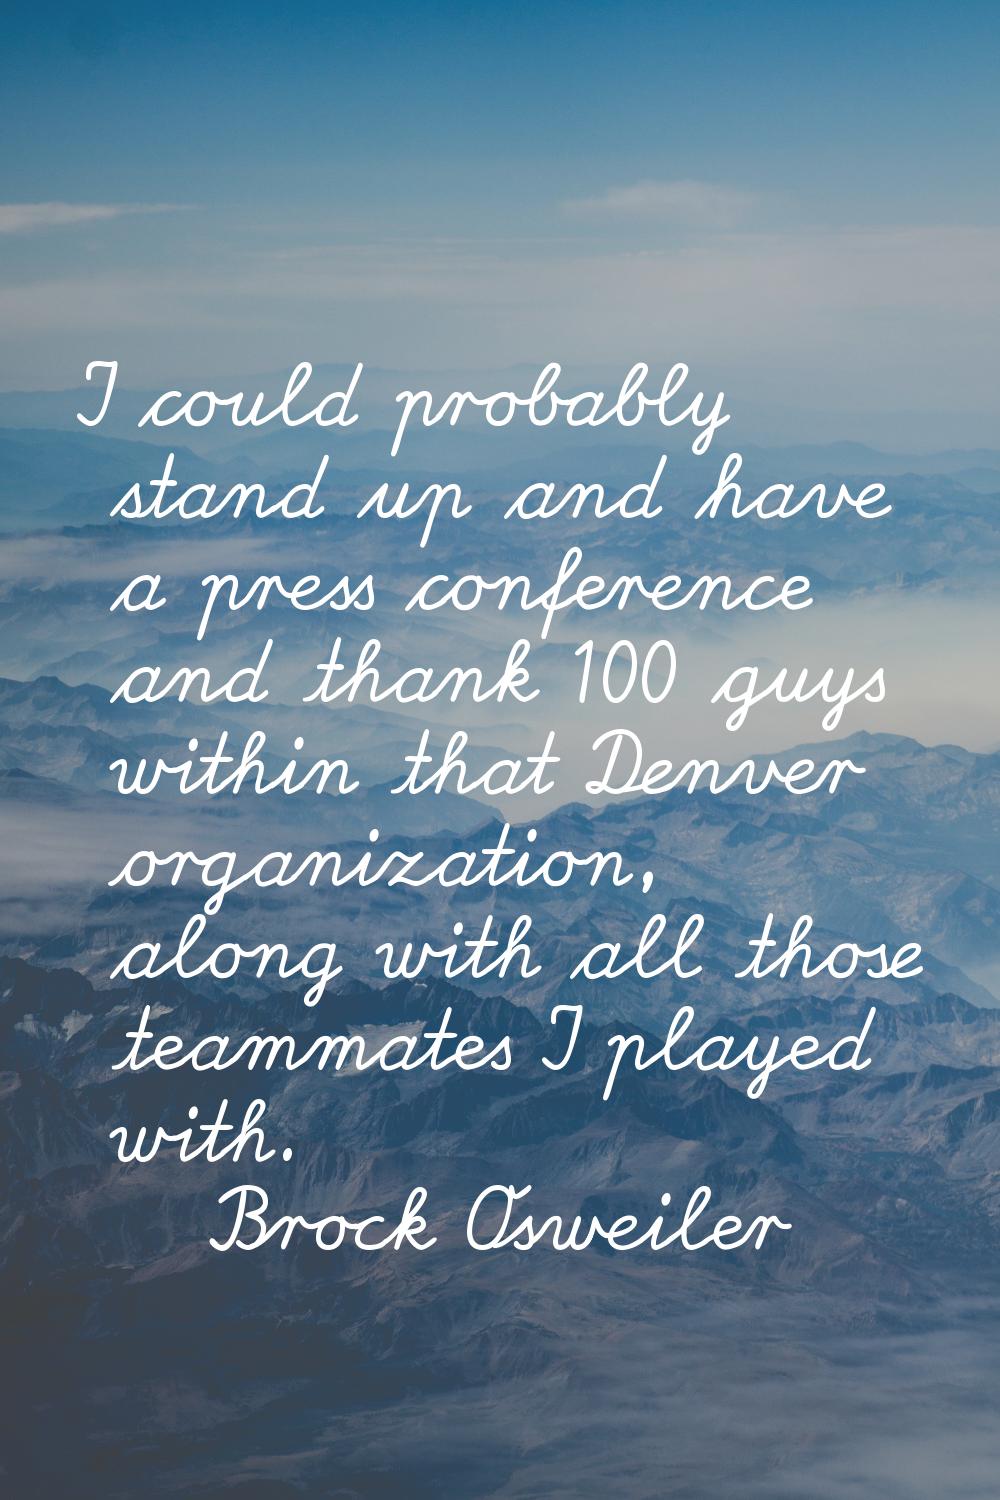 I could probably stand up and have a press conference and thank 100 guys within that Denver organiz